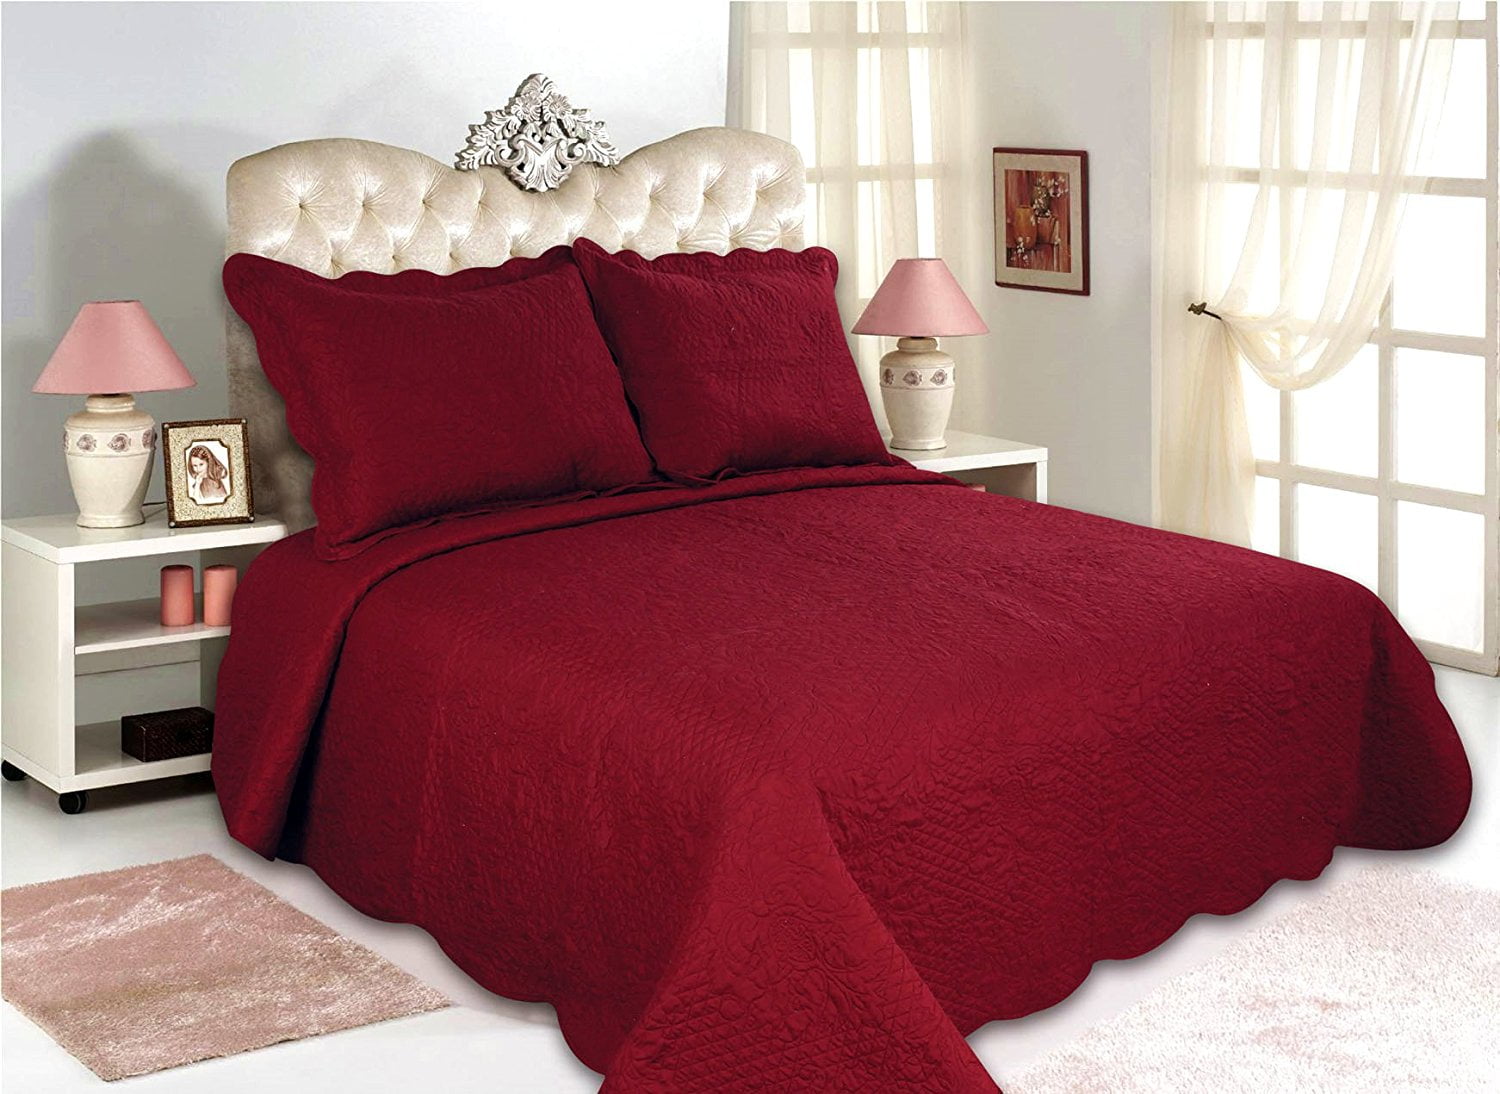 Details about   3pc Solid Deep Red Quilted Bedspread Set AND Decorative Pillow Shams ALL SIZES 